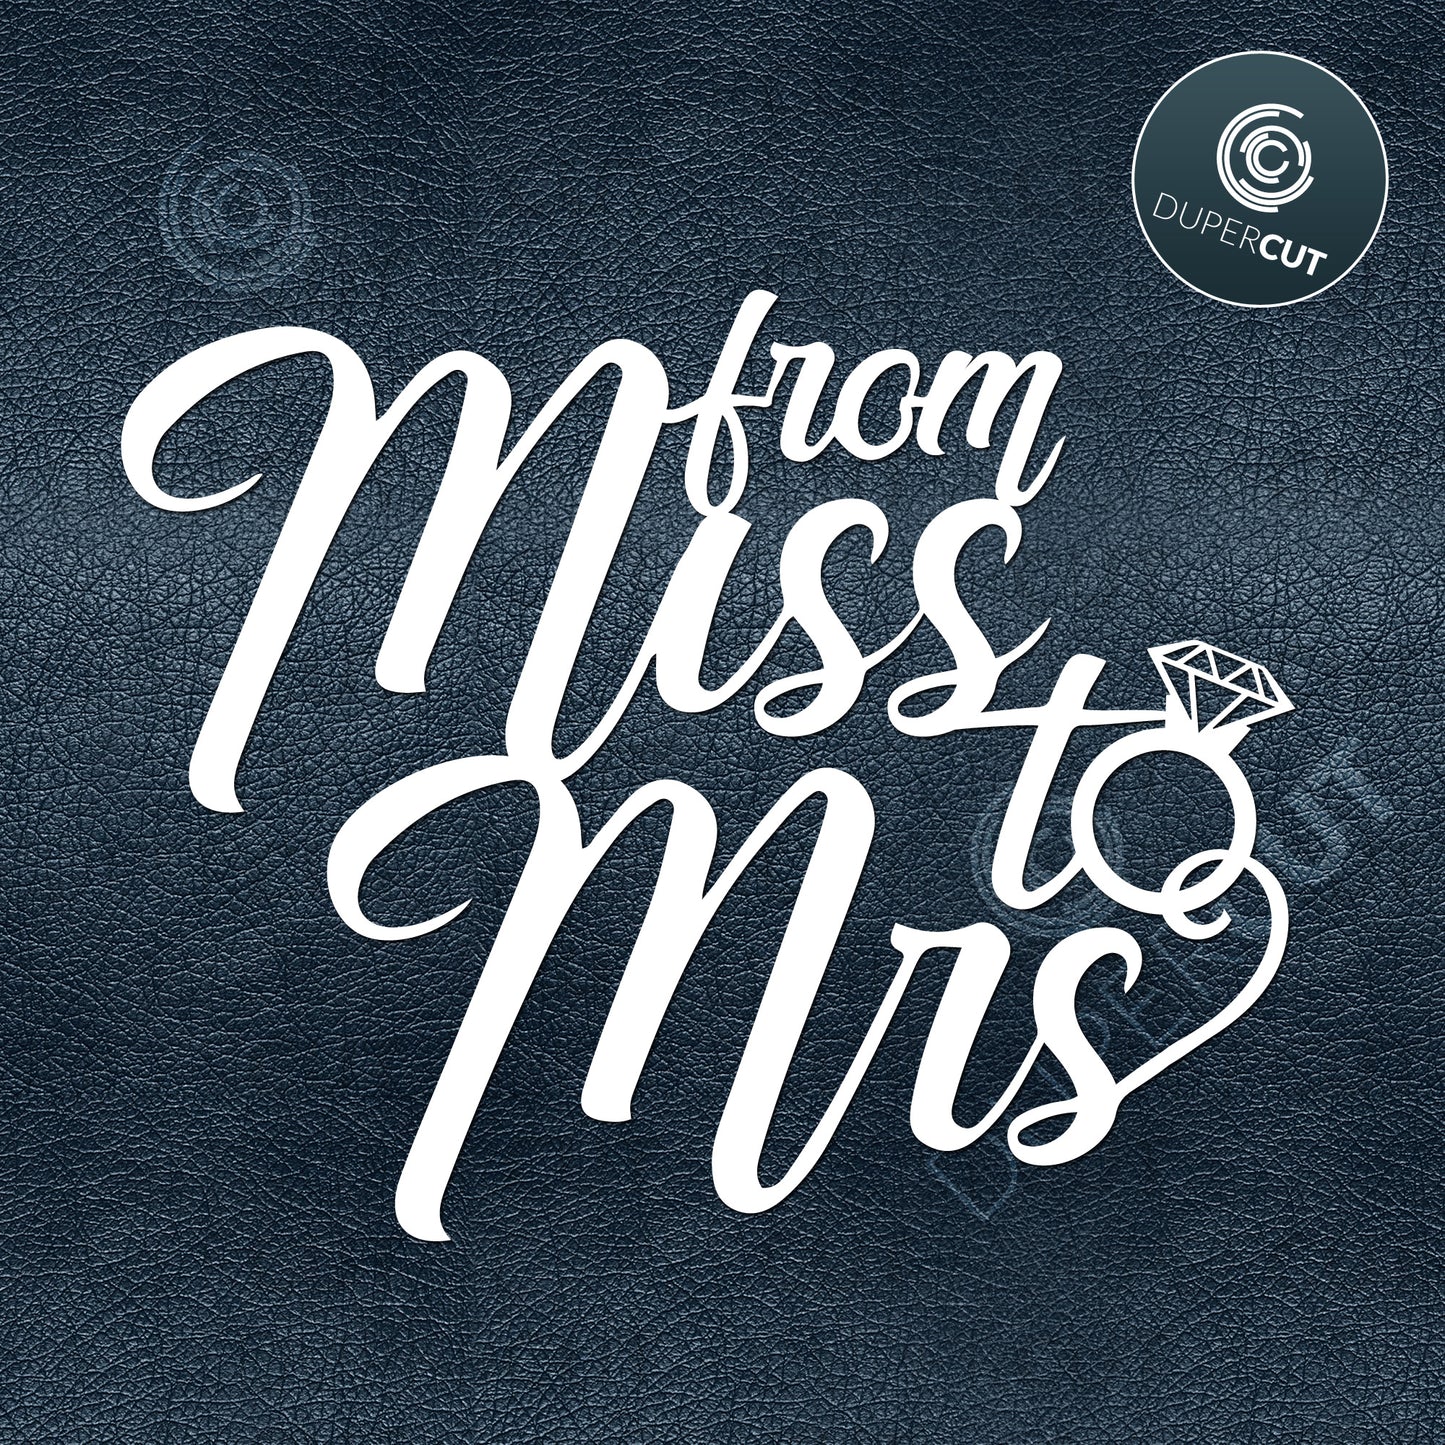 FROM MISS TO MRS - DIY cake topper template for batchelorette party, hen party - SVG PDF DXF cutting files for laser and digital machines, Glowforge, Cricut, Silhouette cameo, CNC plasma